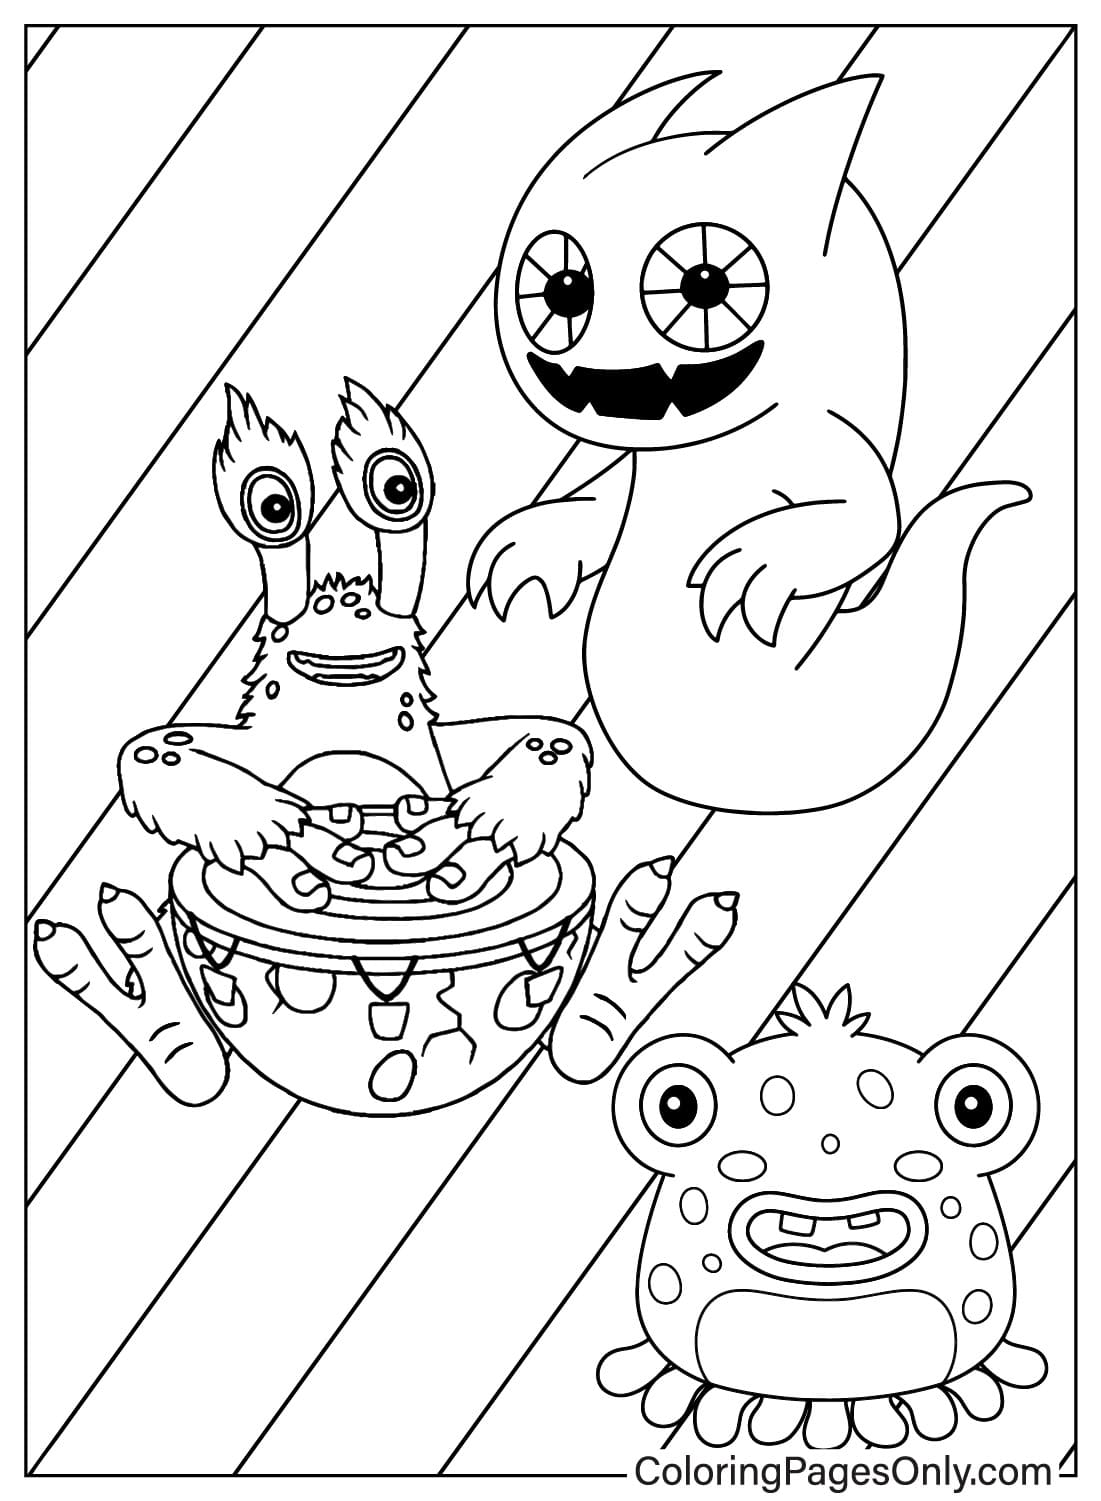 Images Ghazt Coloring Page from Ghazt